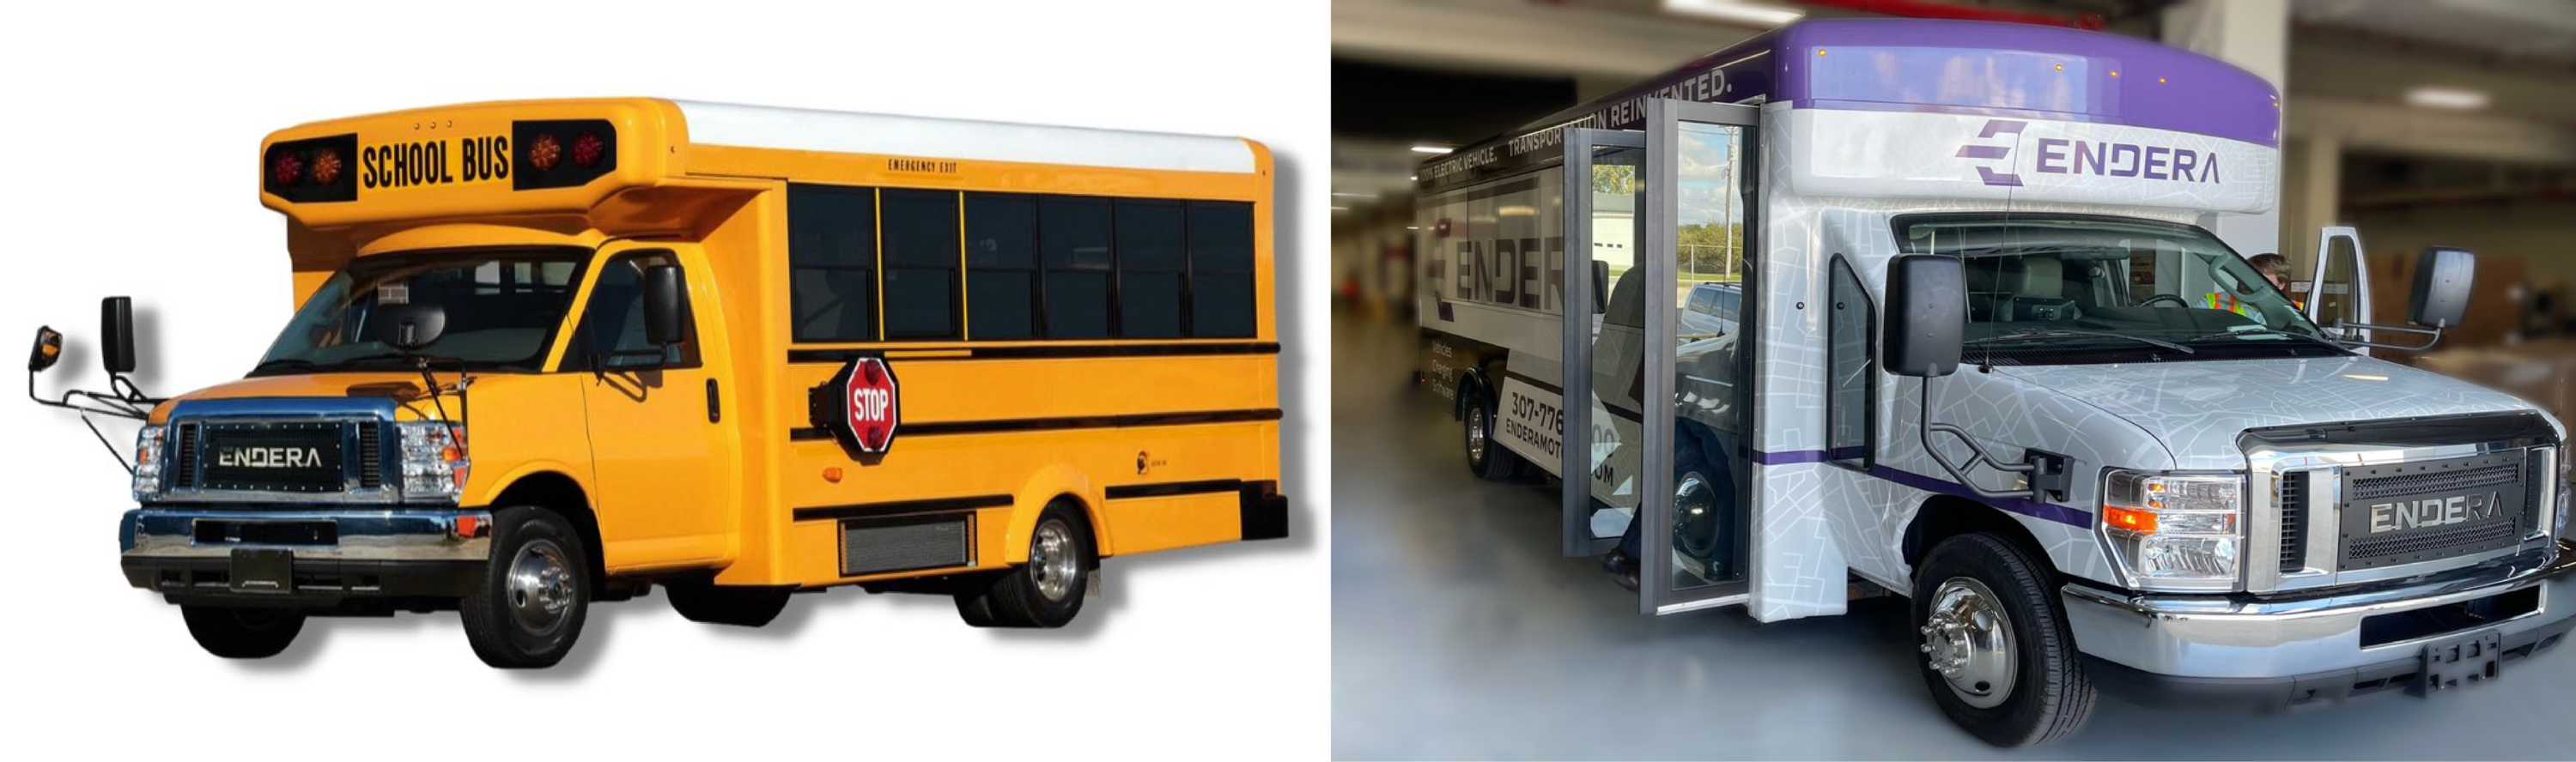 Endera electric school bus and Endera electric shuttle bus